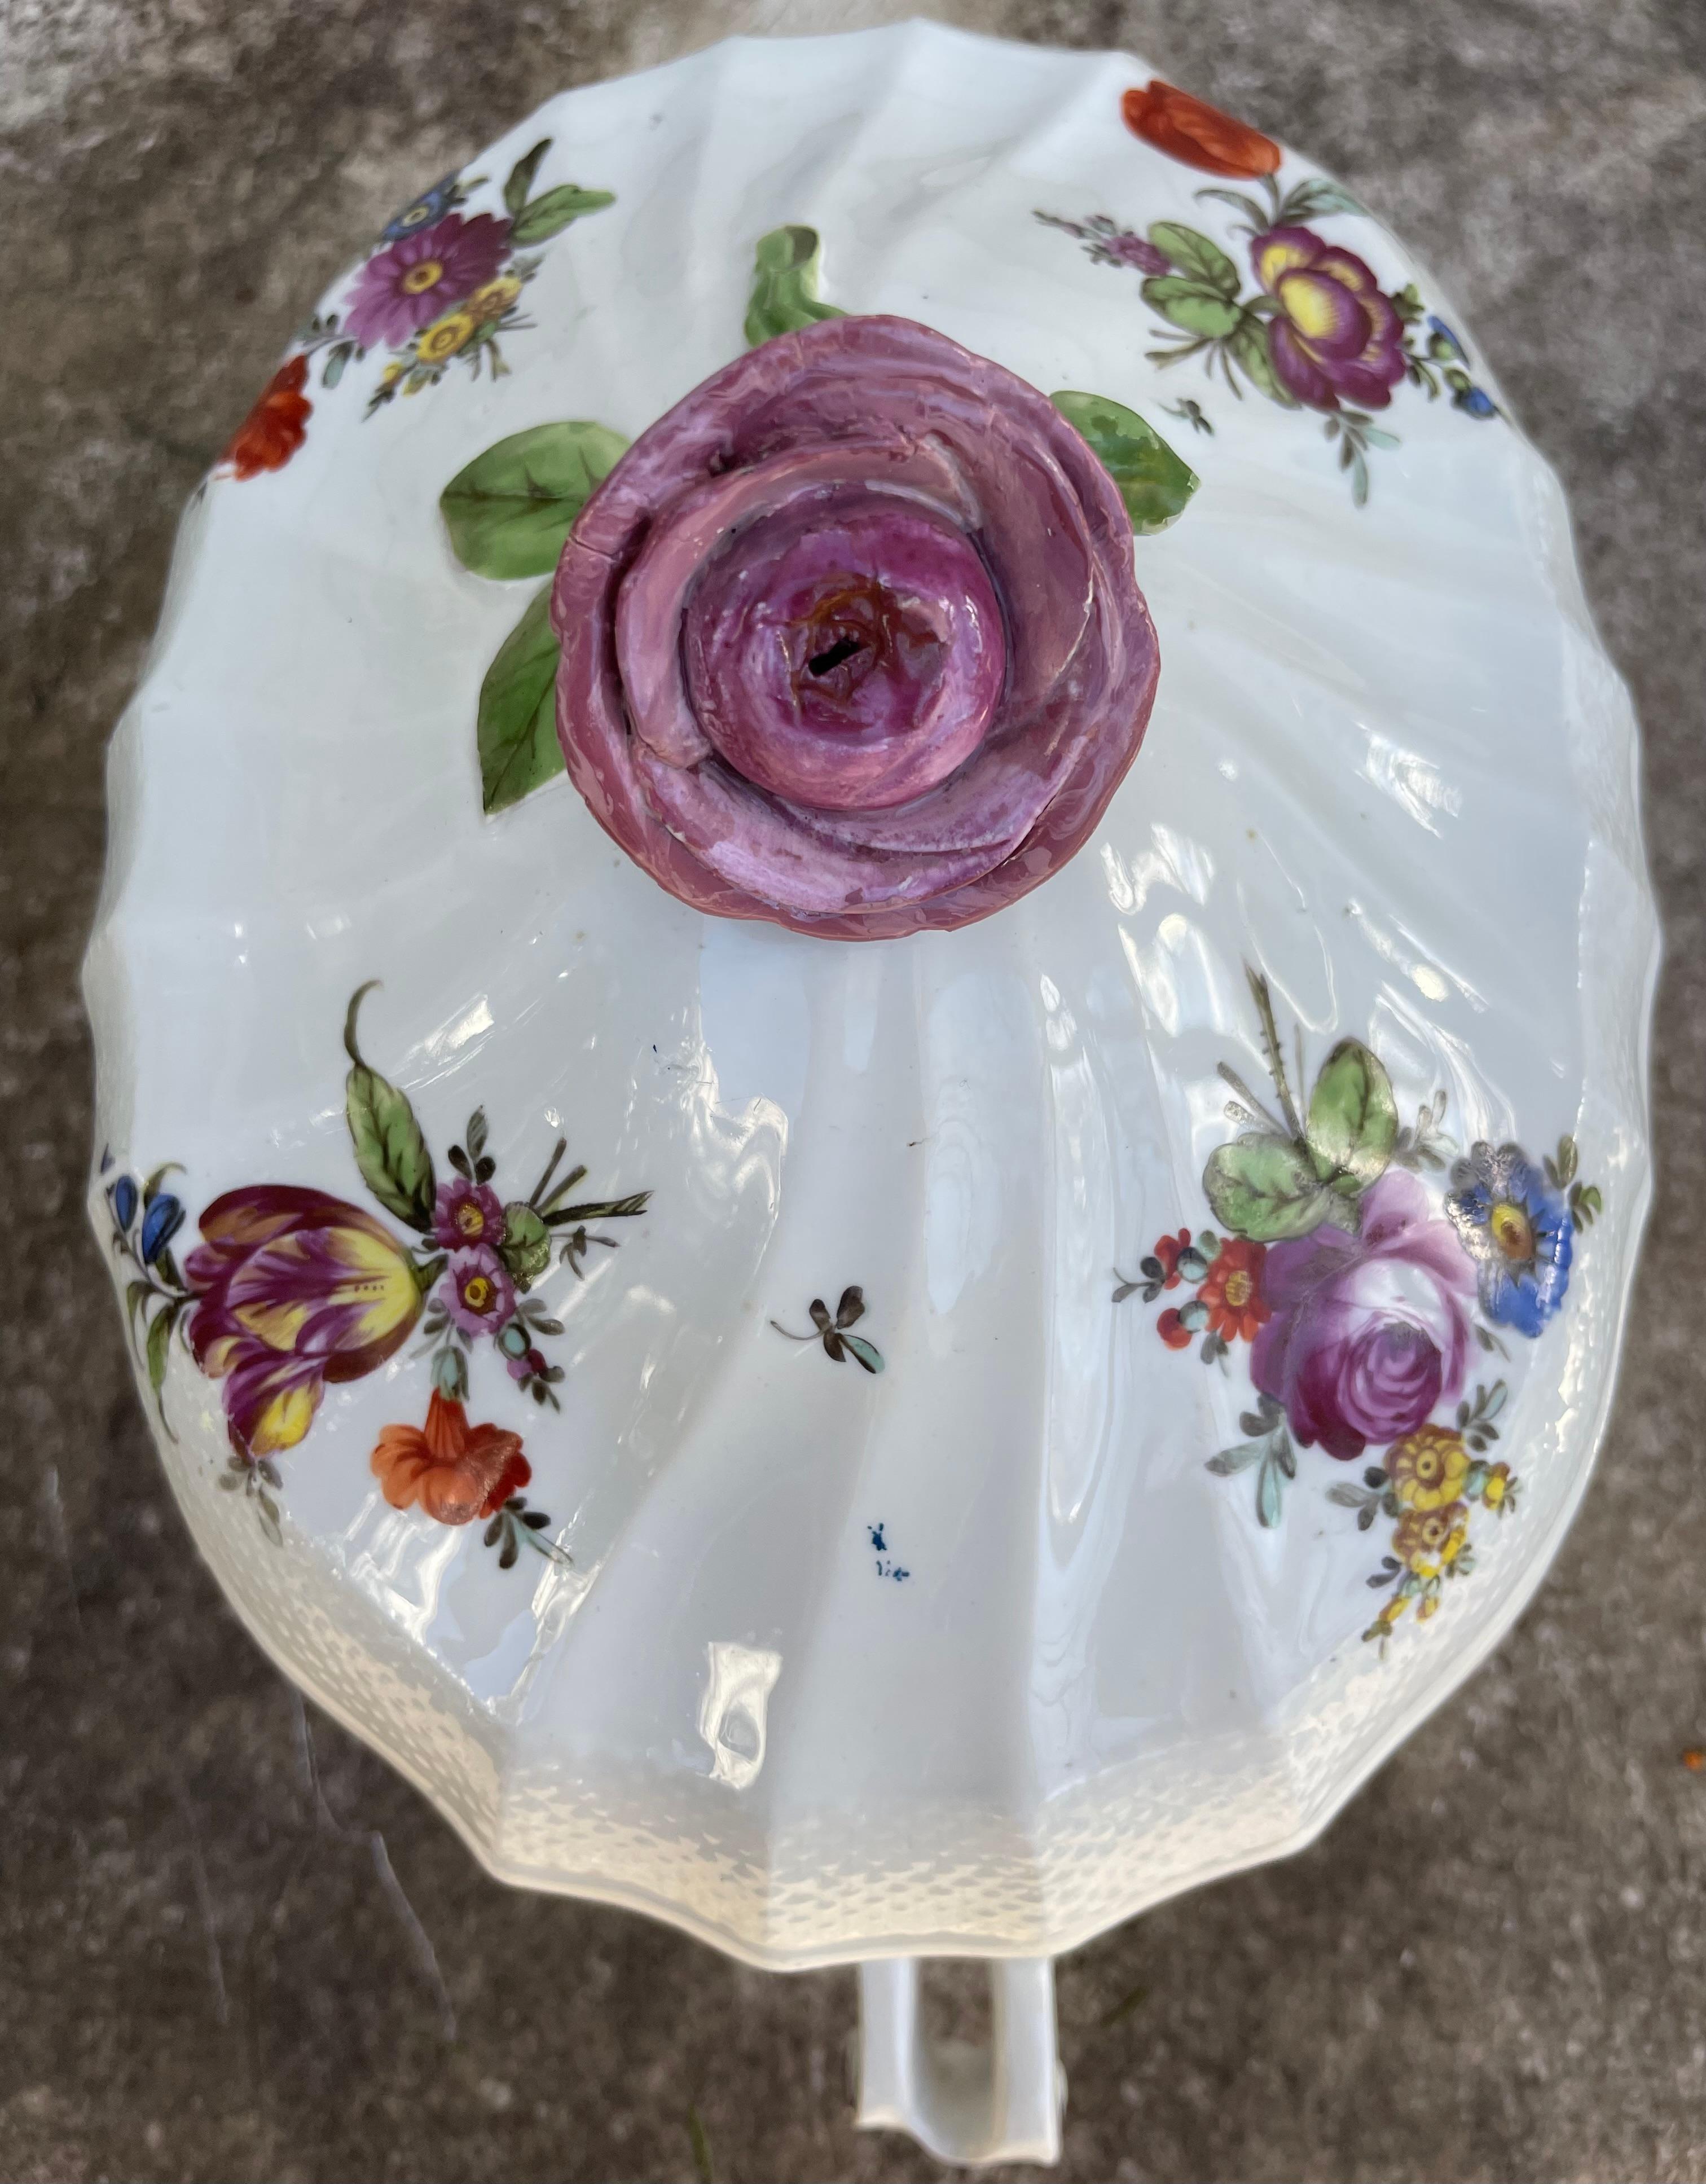 Purple floral tureen. Vienna covered serving dish of ovoid form with sigillated outflowing ribs with wicker borders and tendril-like scroll handles. A fine medium size serving piece with large floral sprays in puce, topped by a large purple rose